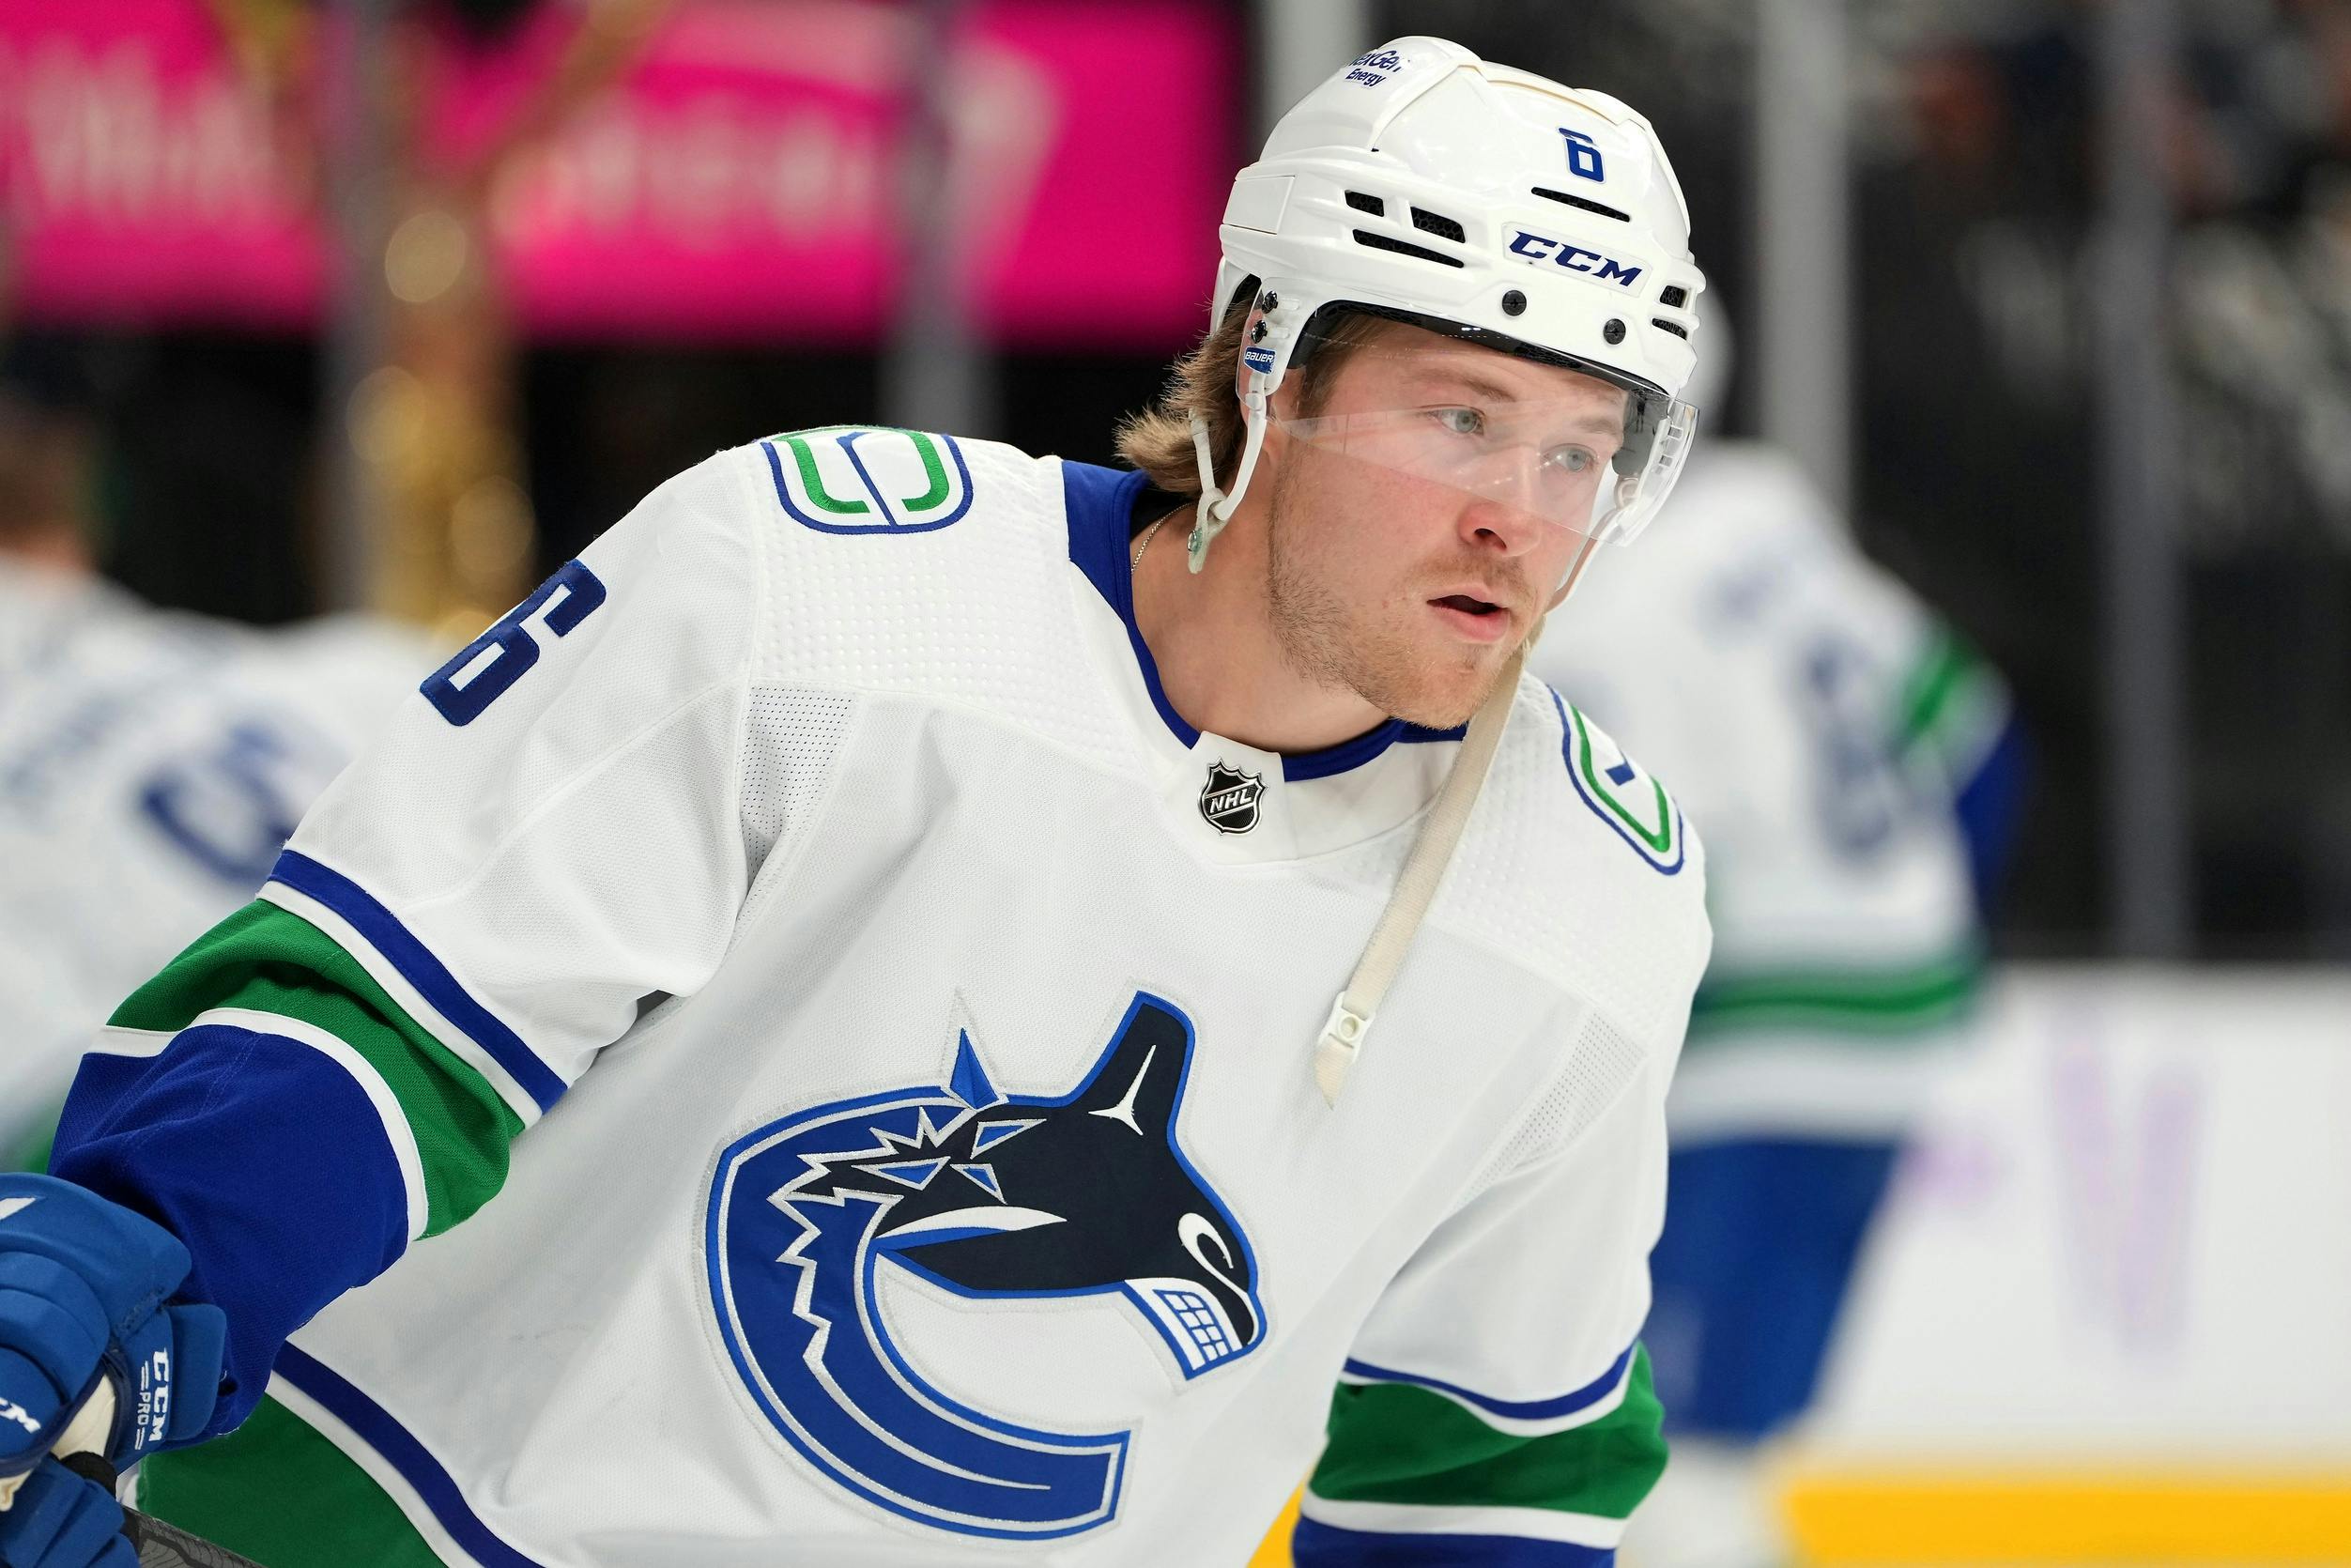 INFOGRAPHIC: who is Canucks 1st round pick Brock Boeser? - CanucksArmy